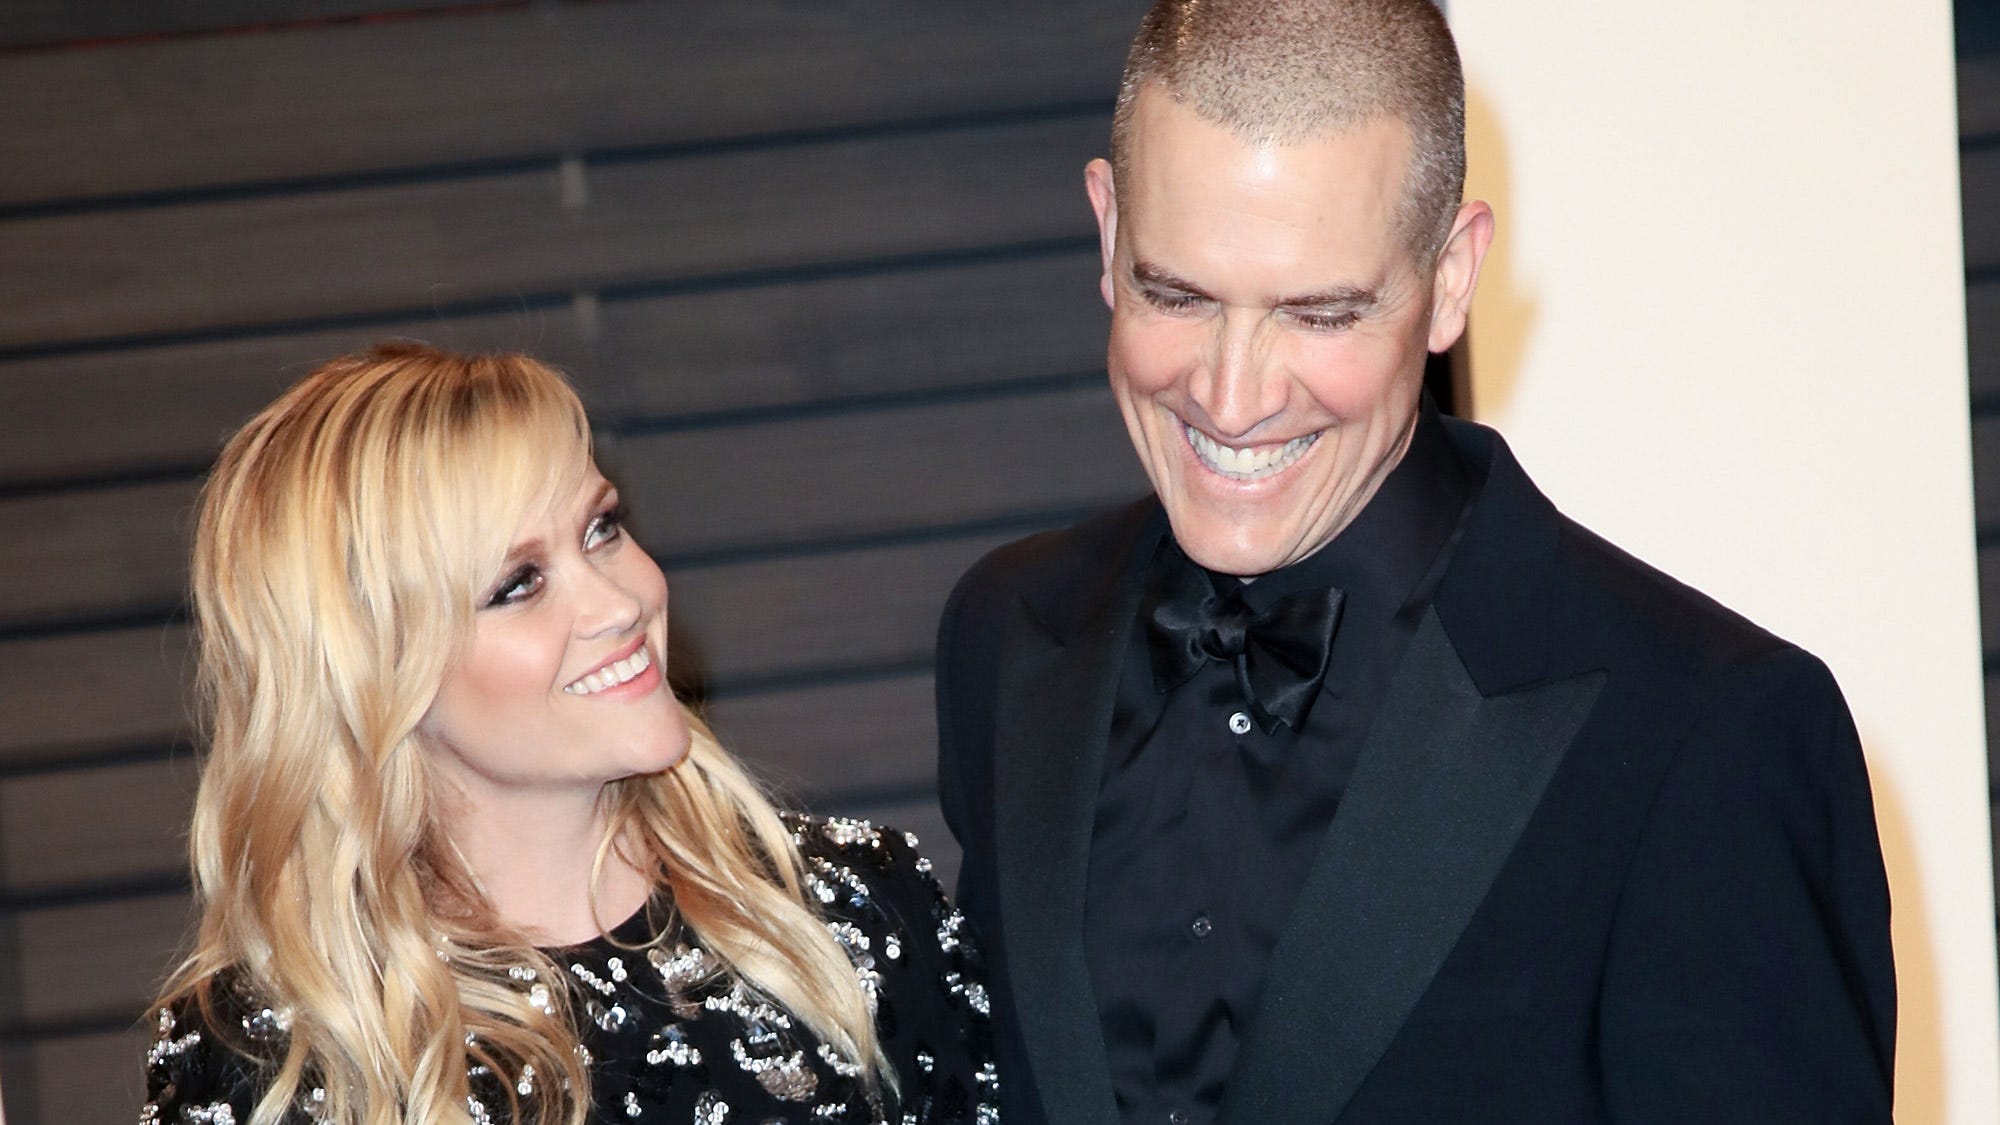 Jim Toth with his wife Reese Witherspoon at an event